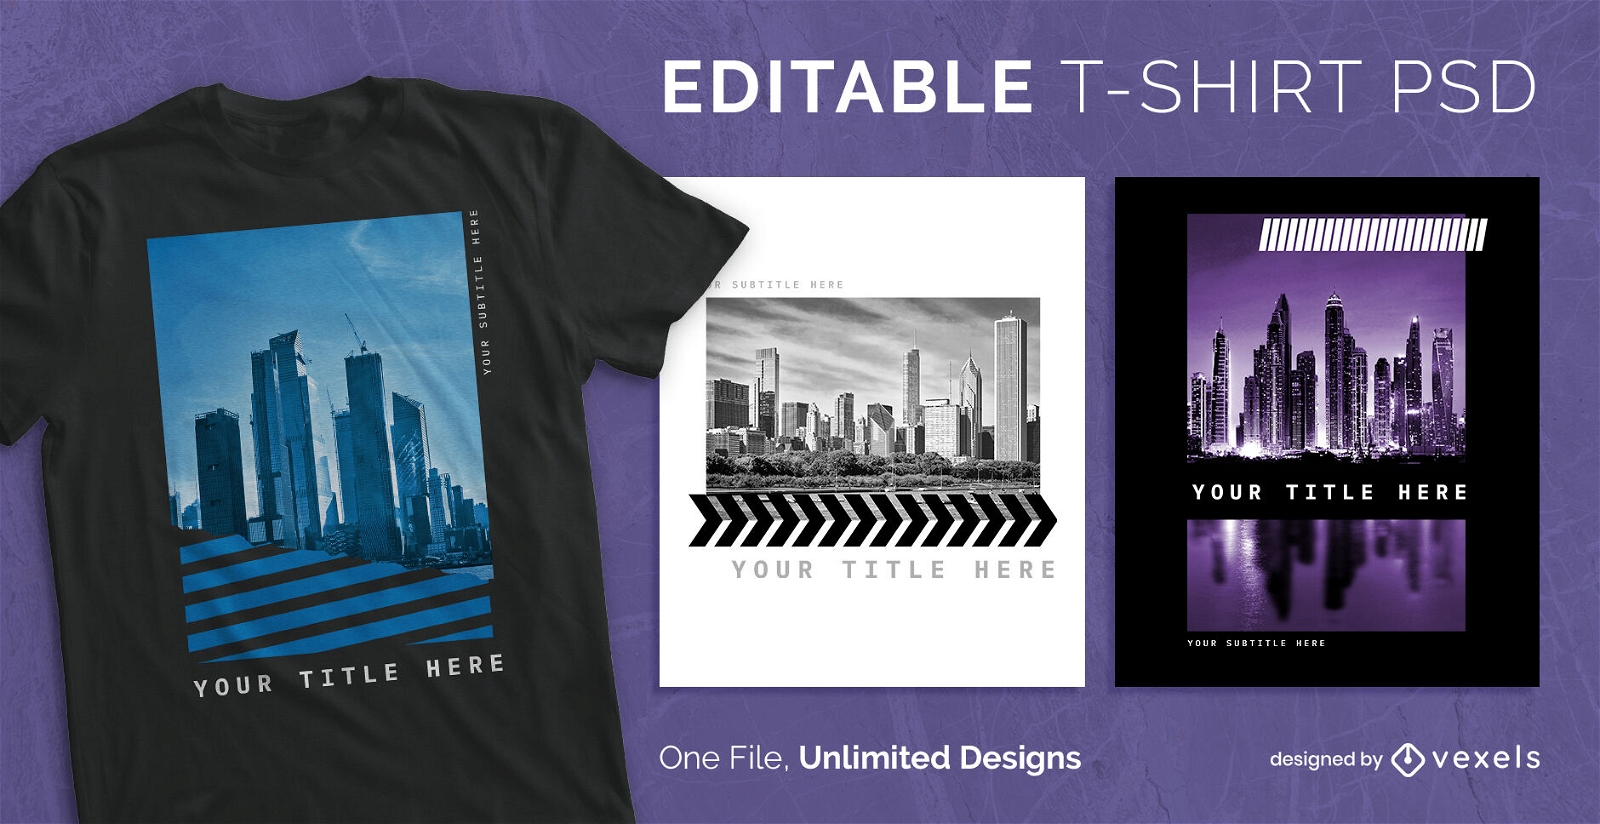 Buildings and cities scalable t-shirt psd